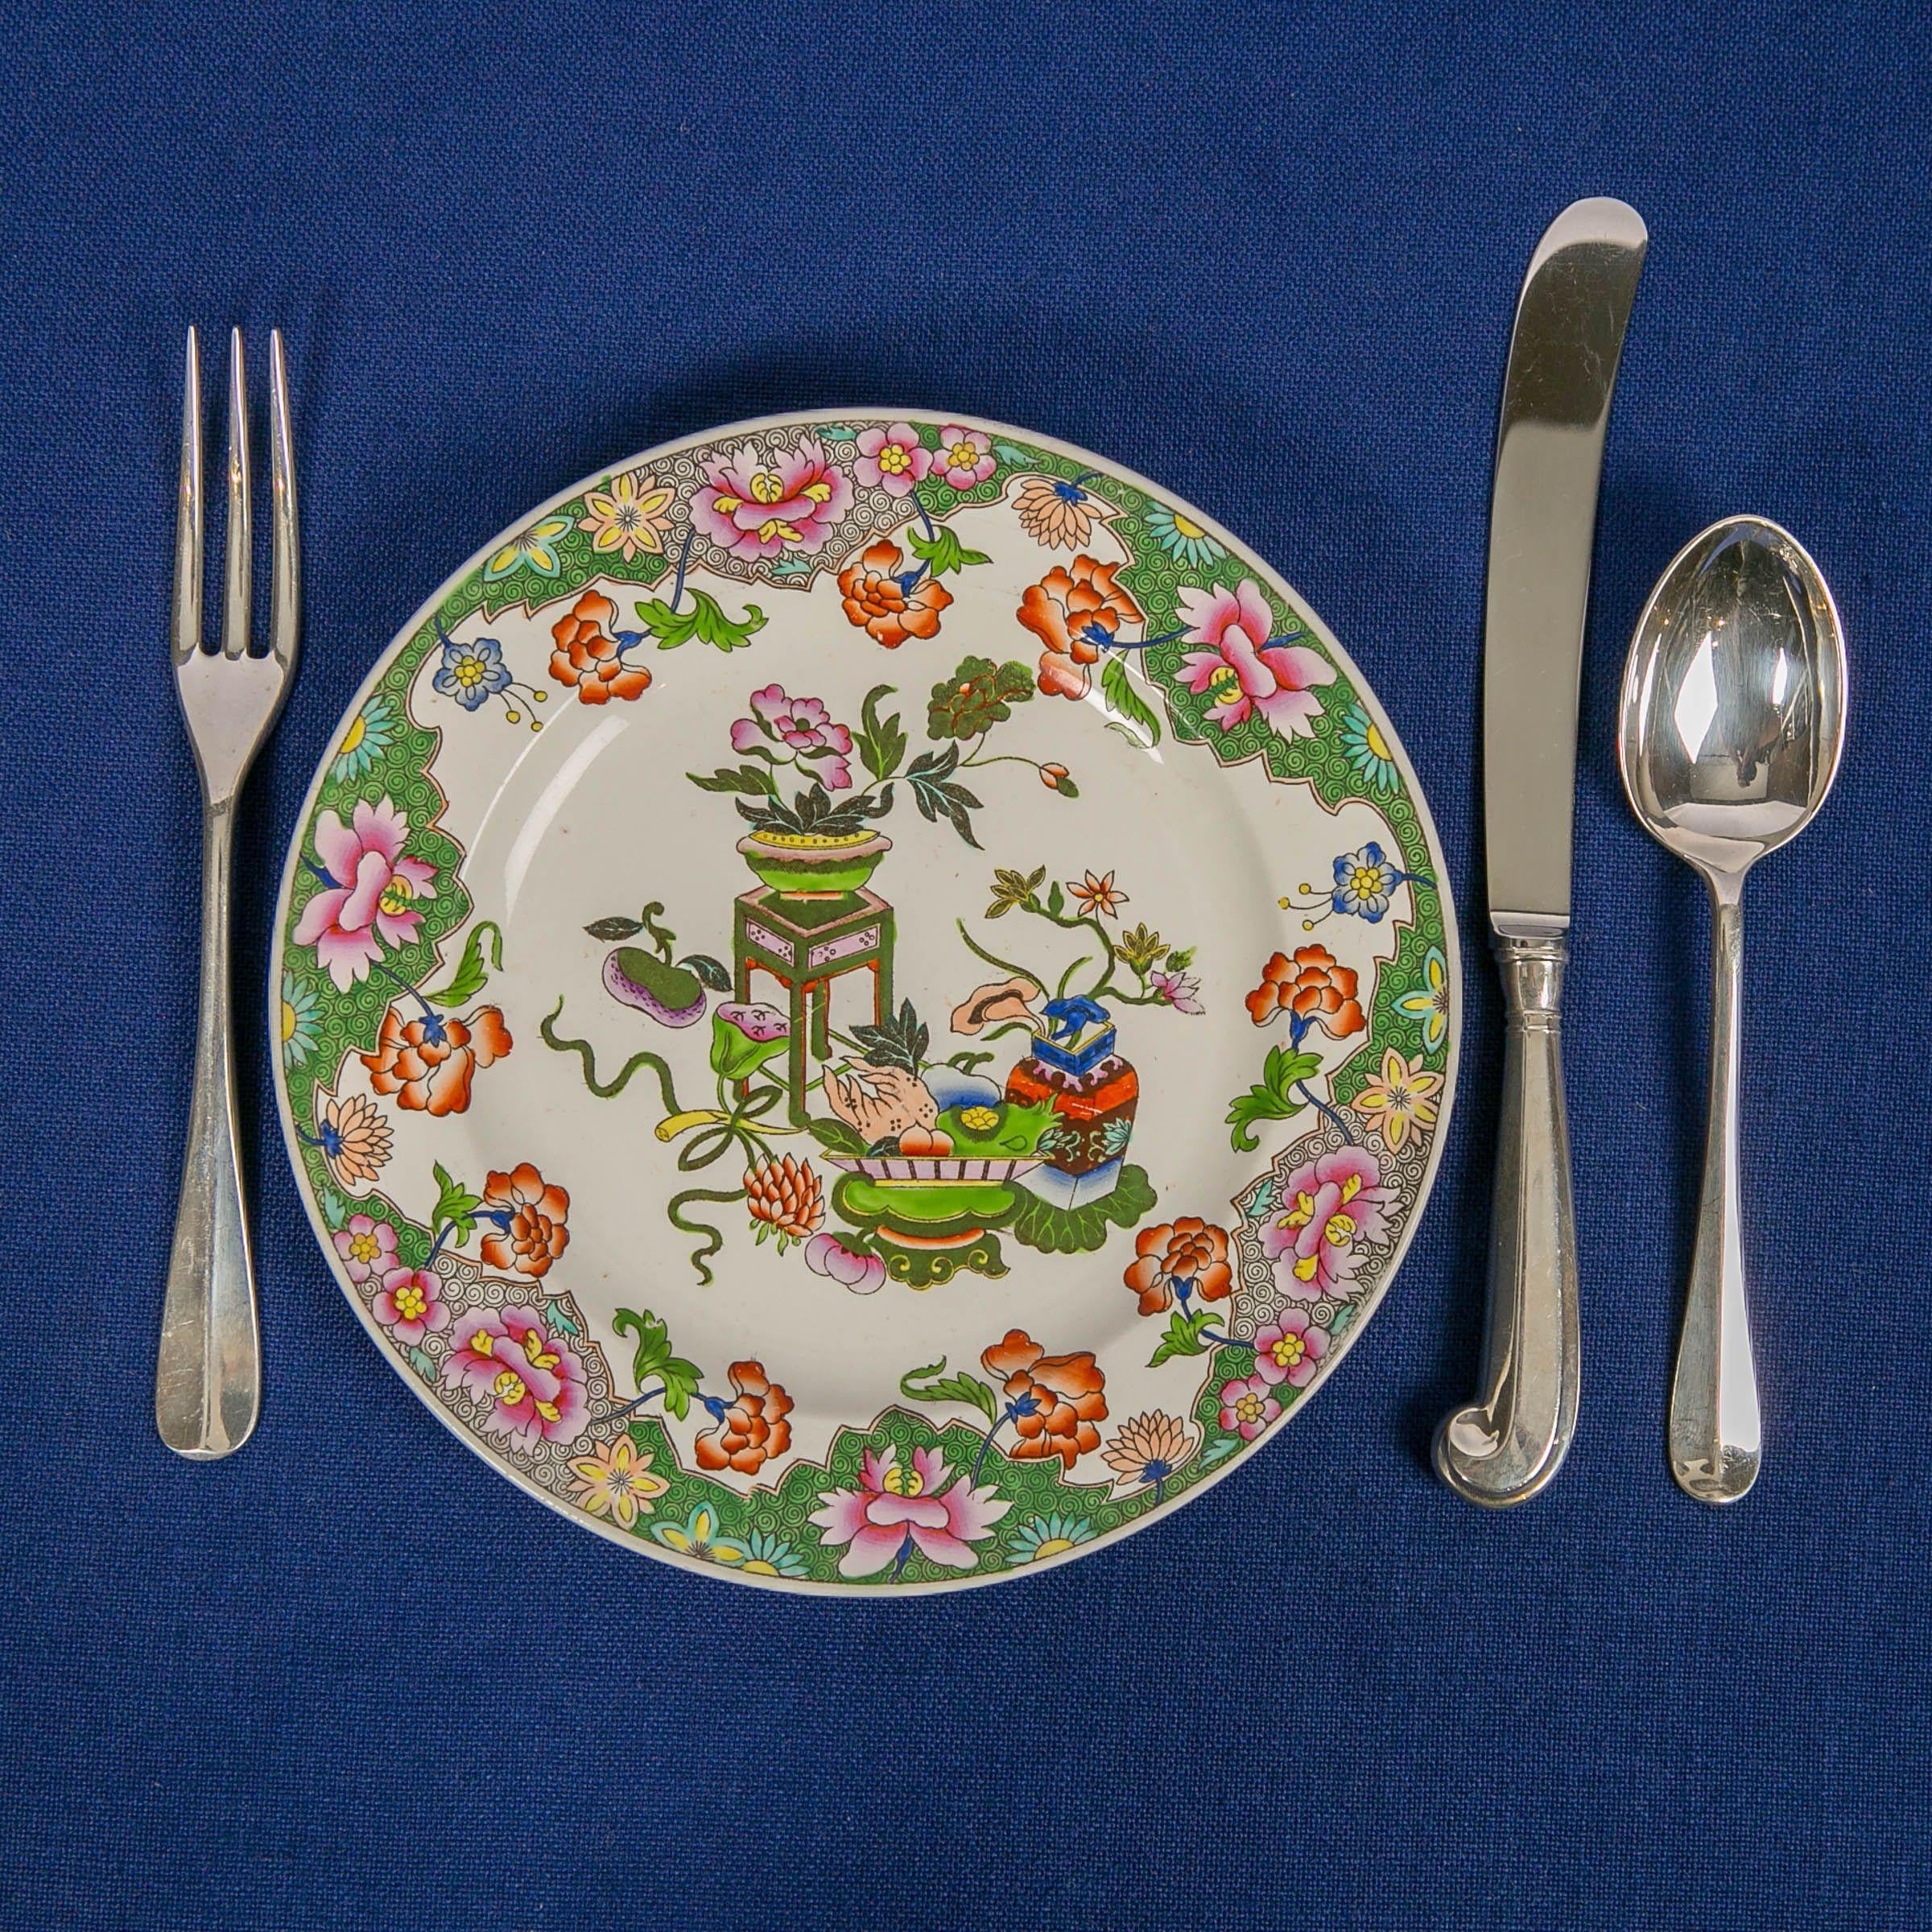 A set of ten English pearl-glazed creamware plates with chinoiserie decoration. The plates show beautiful flowers and traditional Chinese objects of good luck. Made by Spode in England circa 1820, the decoration is exuberant and asymmetrical, with a